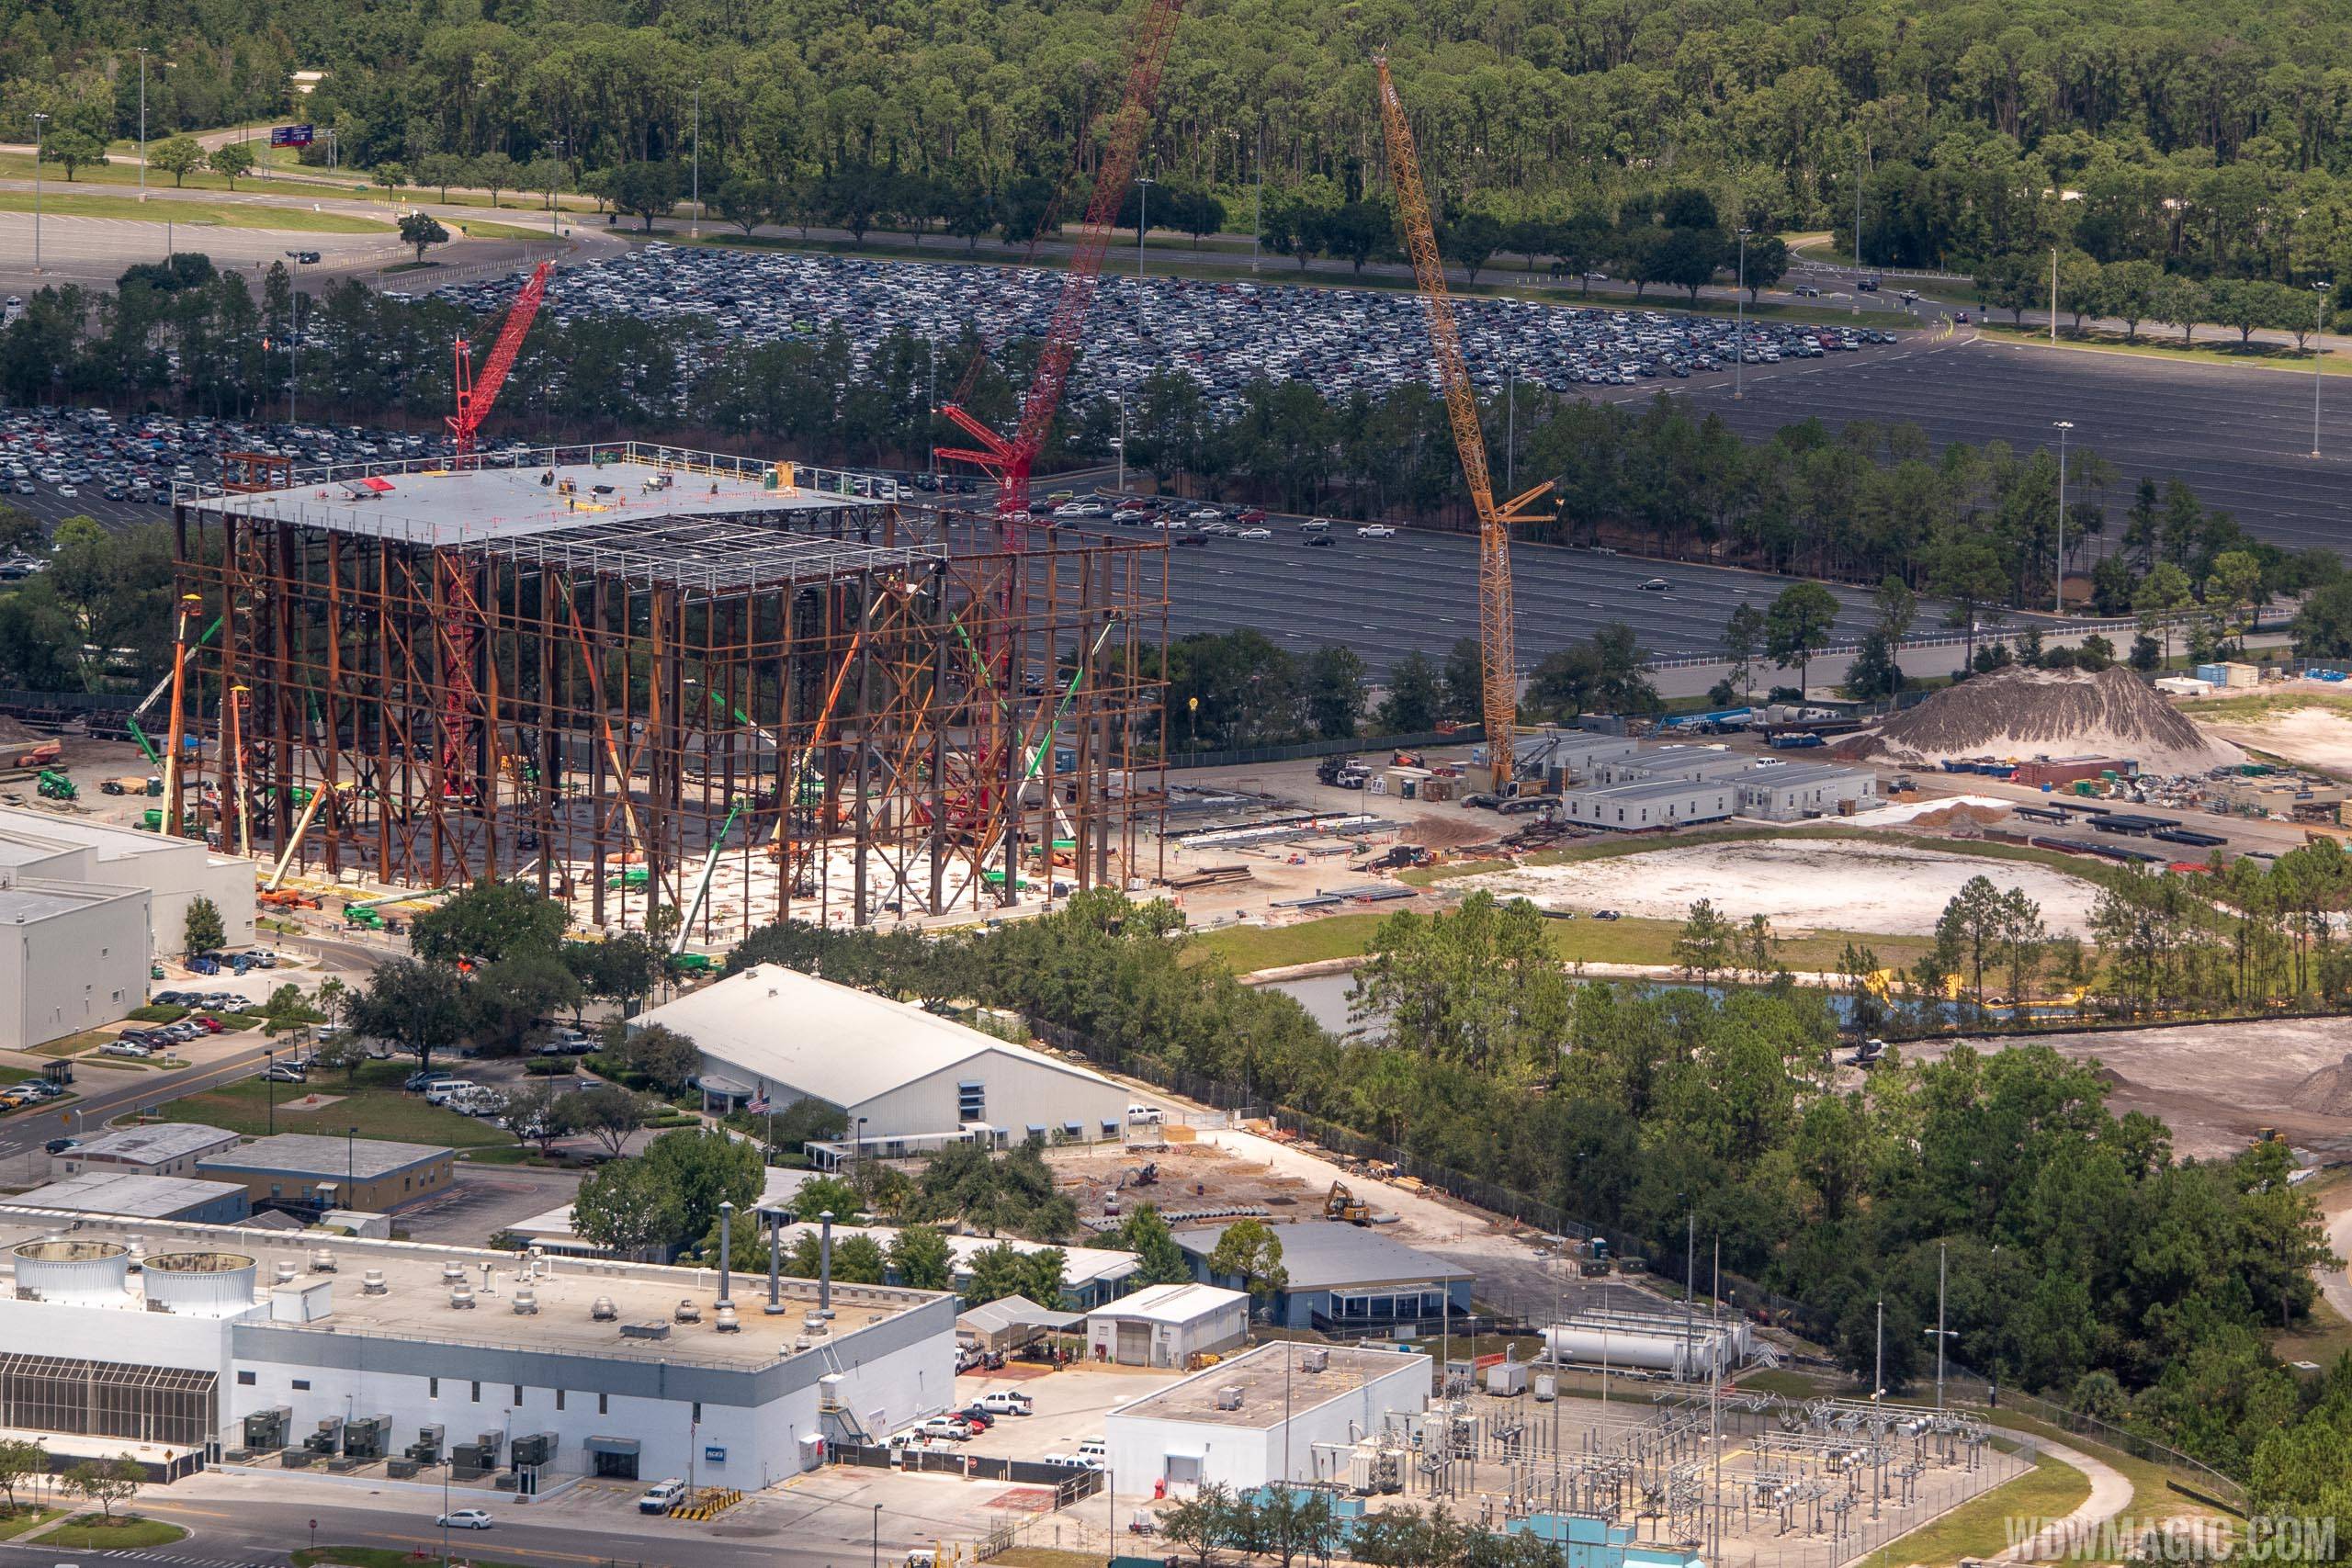 Guardians of the Galaxy construction aerial views - August 2018